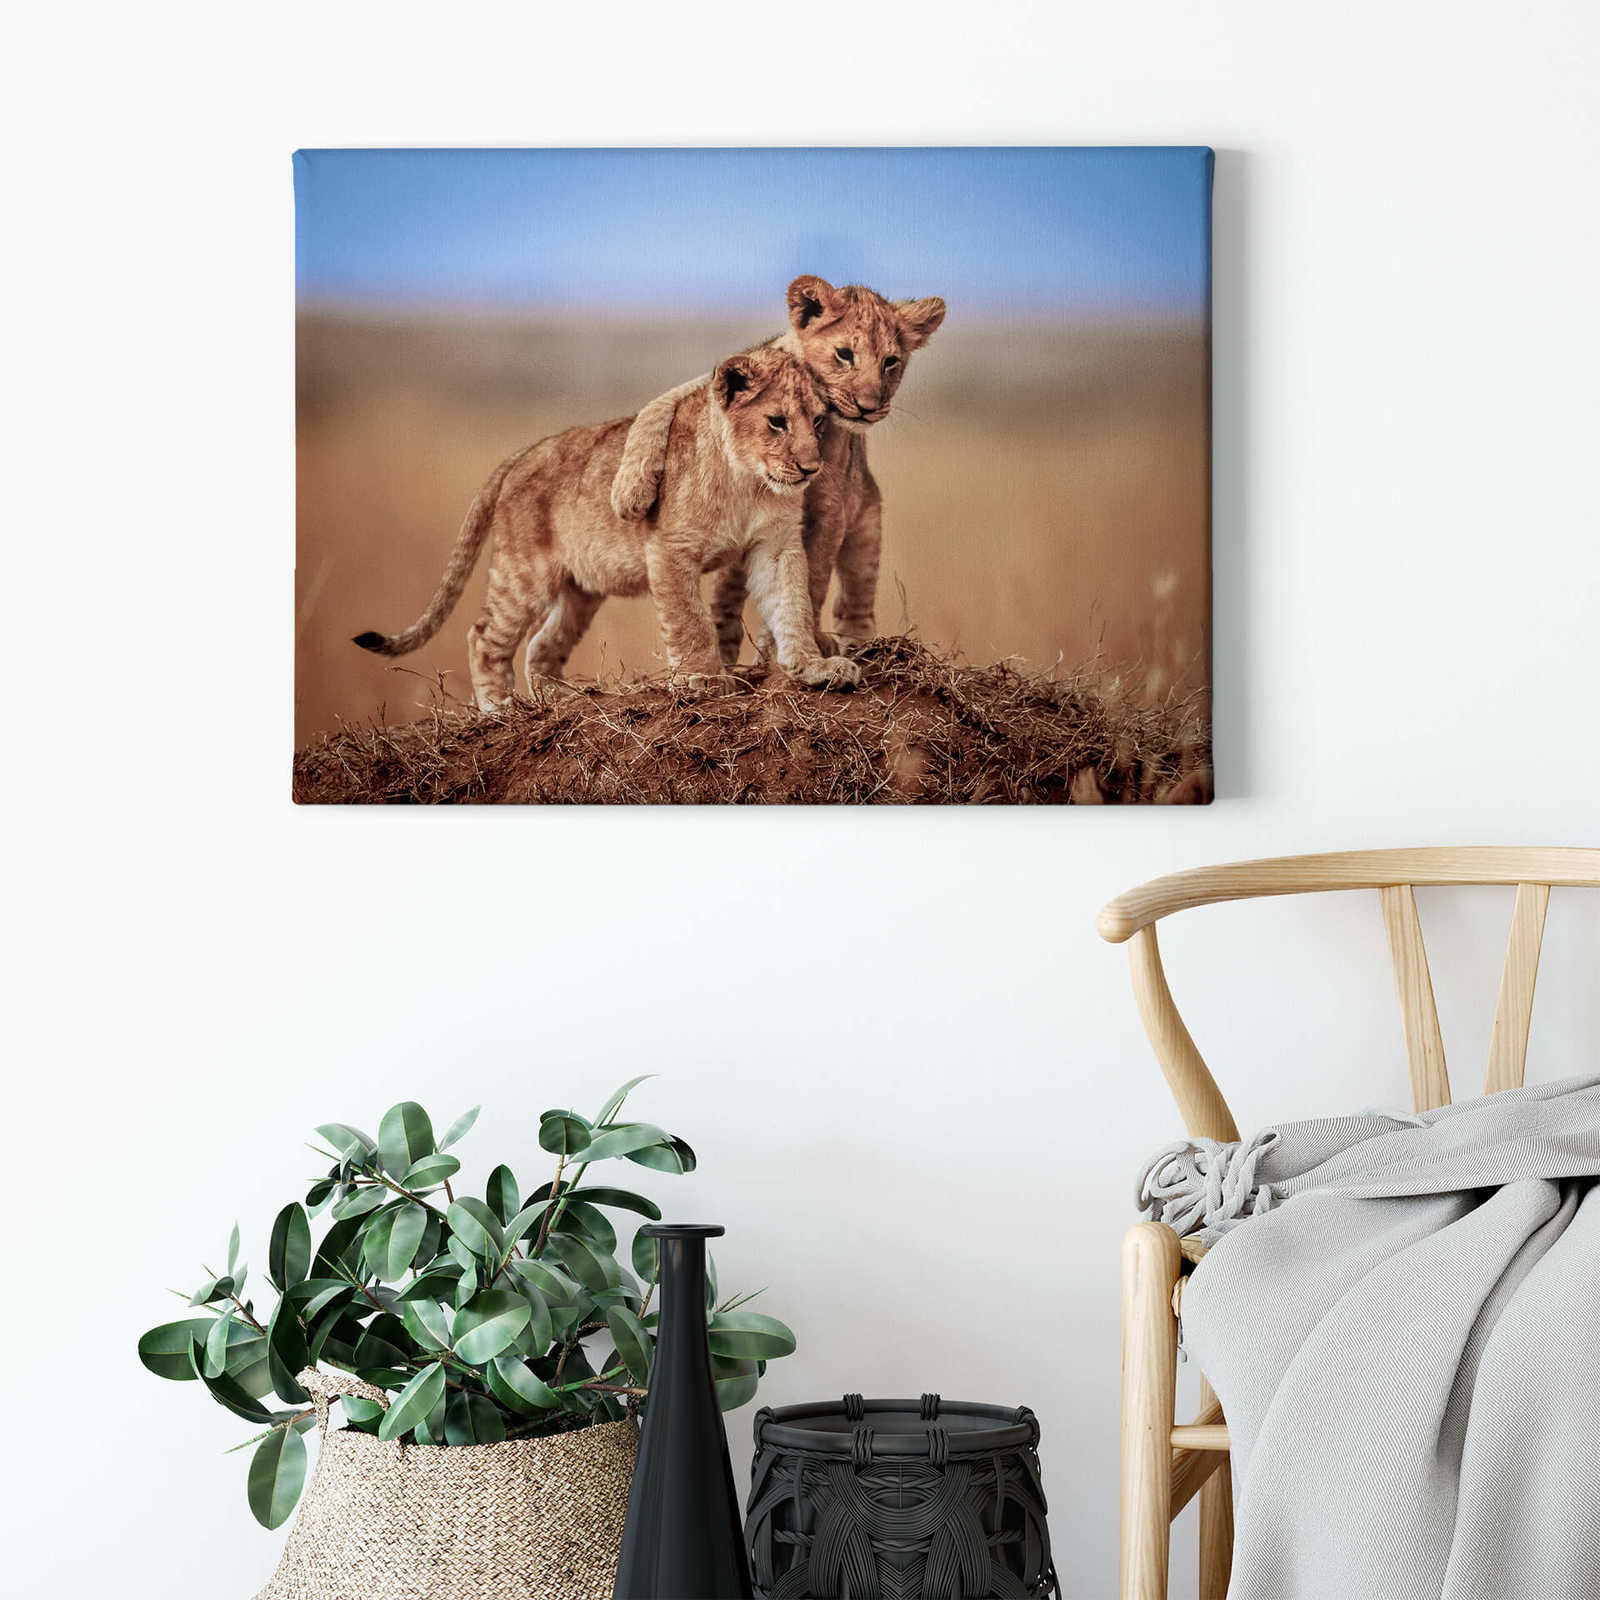             Canvas print little lions at play, nature photographie
        